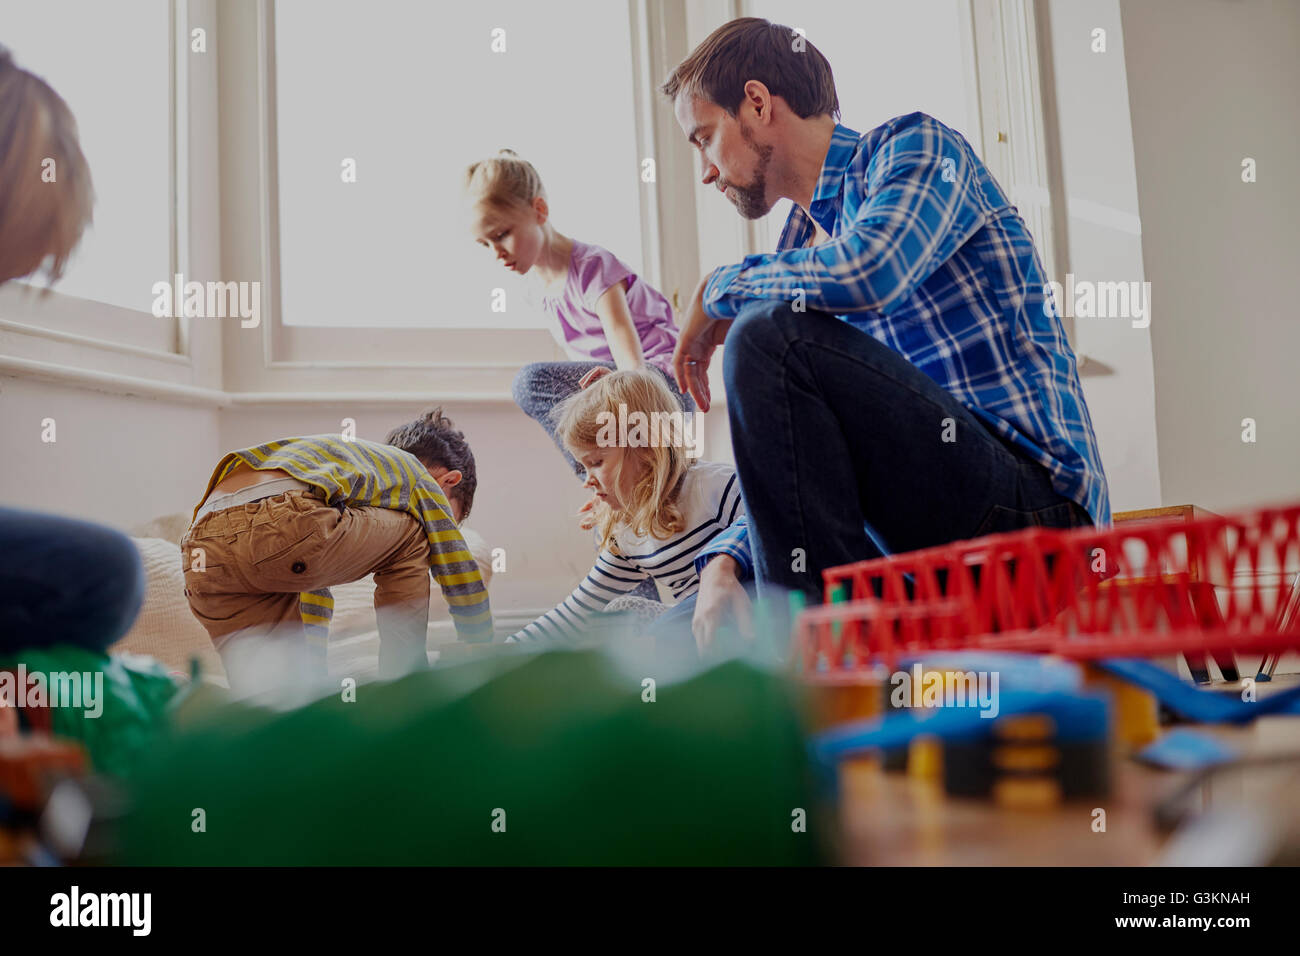 Father watching children play, low angle view Stock Photo